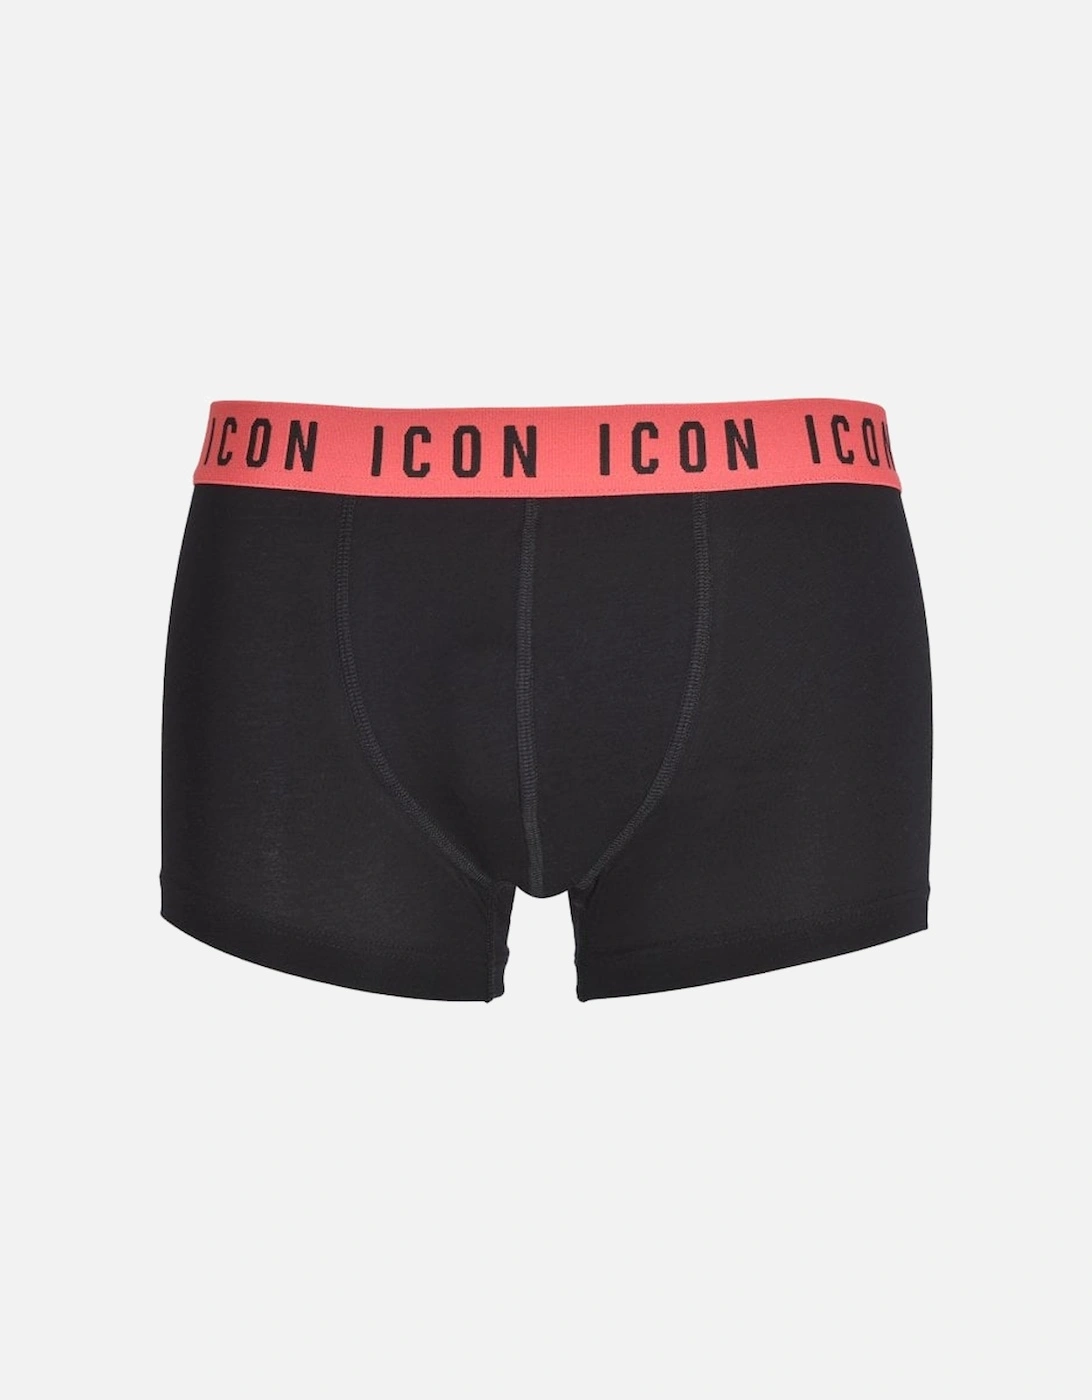 ICON Waistband Boxer Trunk, Black/coral, 7 of 6